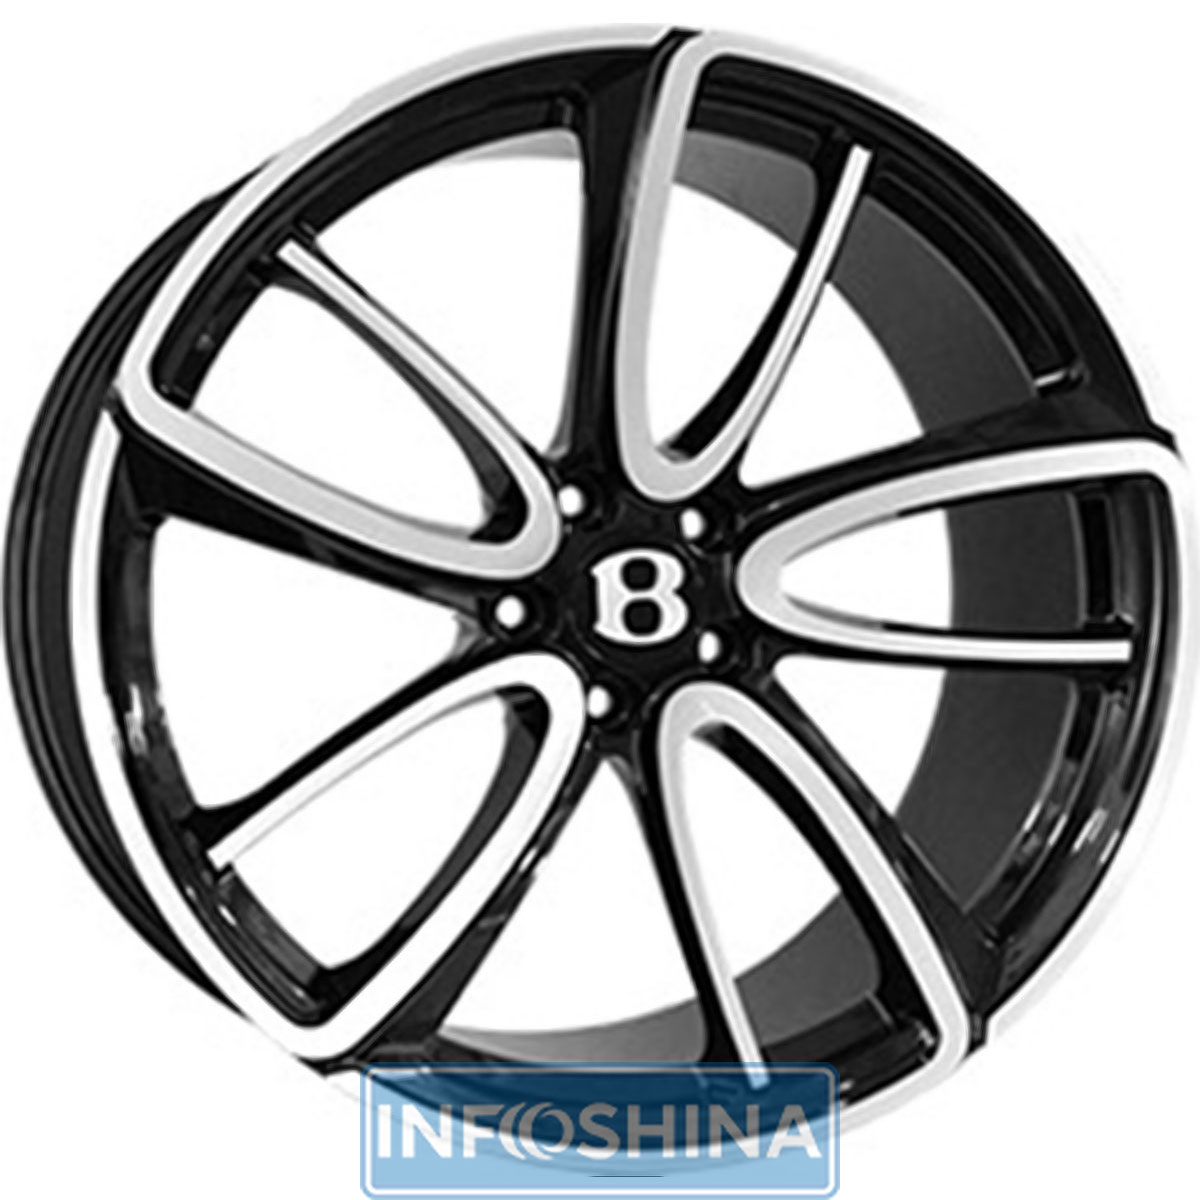 Купити диски Replica Forged BN1040R Gloss Black With Matte Polished R21 W9.5 PCD5x112 ET41 DIA57.1